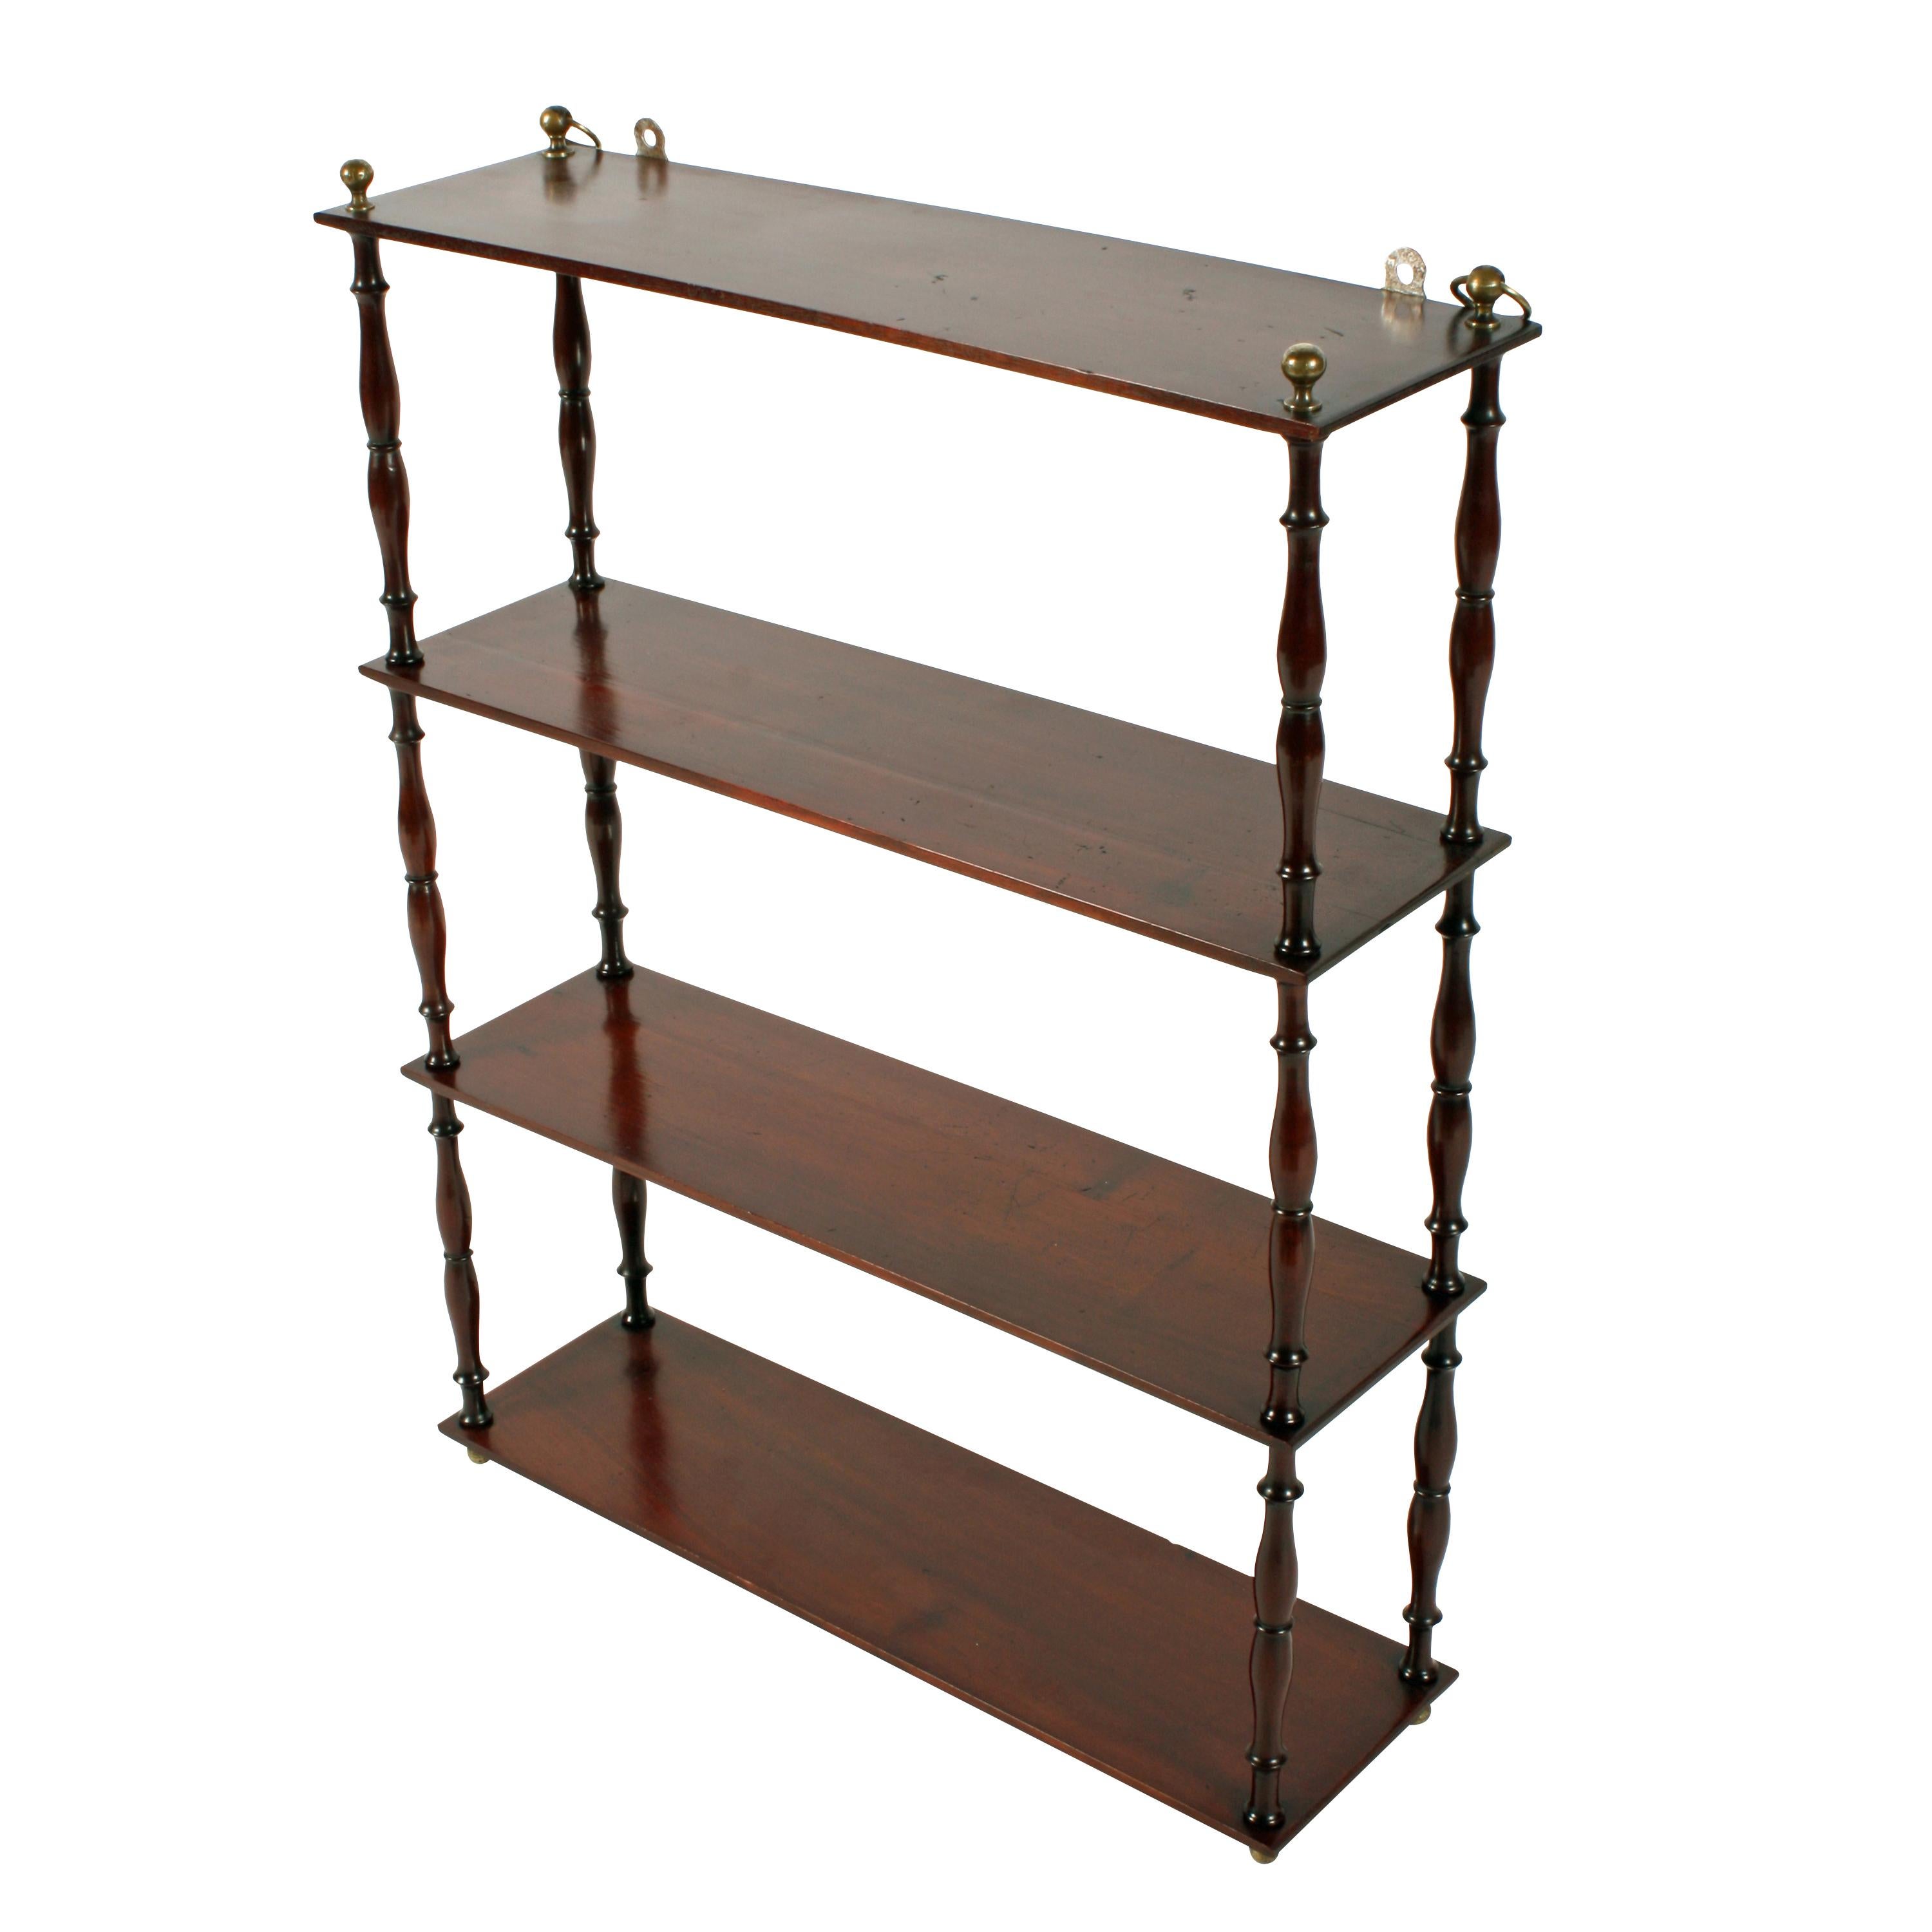 Middle of the 19th century Victorian mahogany four shelf wall hanging shelves.


The four oblong solid mahogany shelves are supported on finely turned and shaped pillars with a brass ball finial at the top.


The top shelf has brass rings from